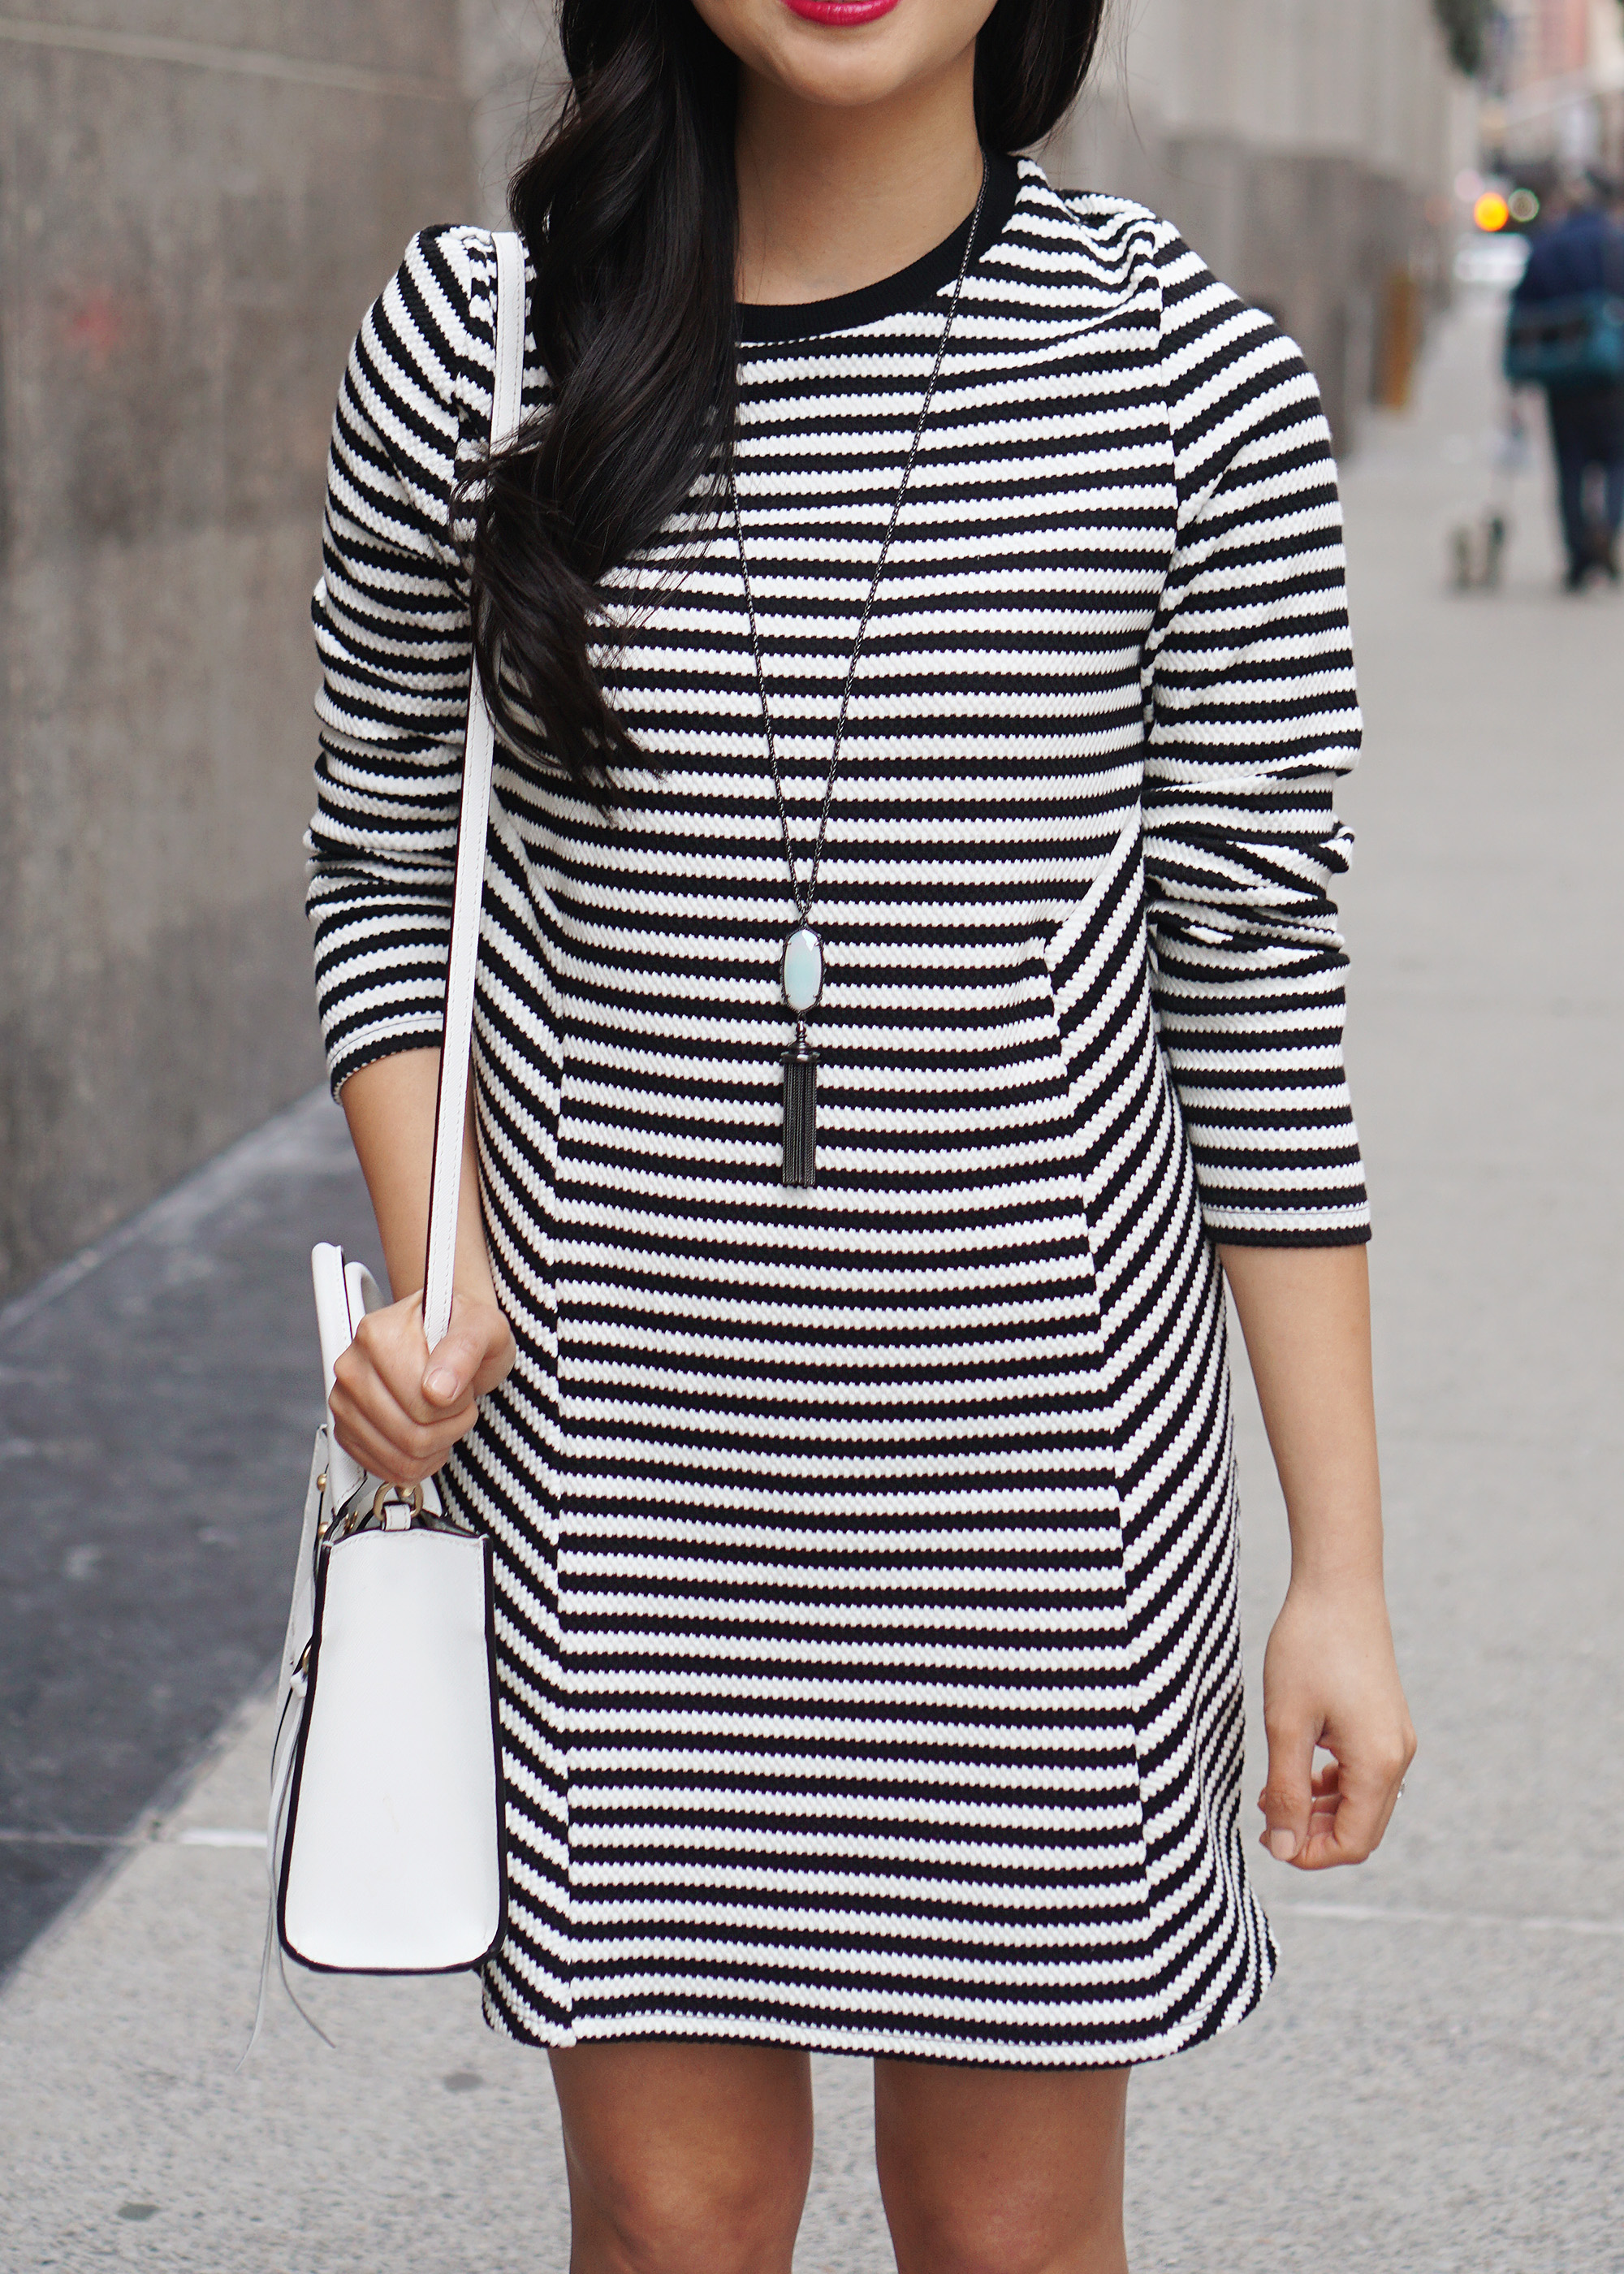 5 Ways to Wear a Black & White Striped Sweater - This is our Bliss